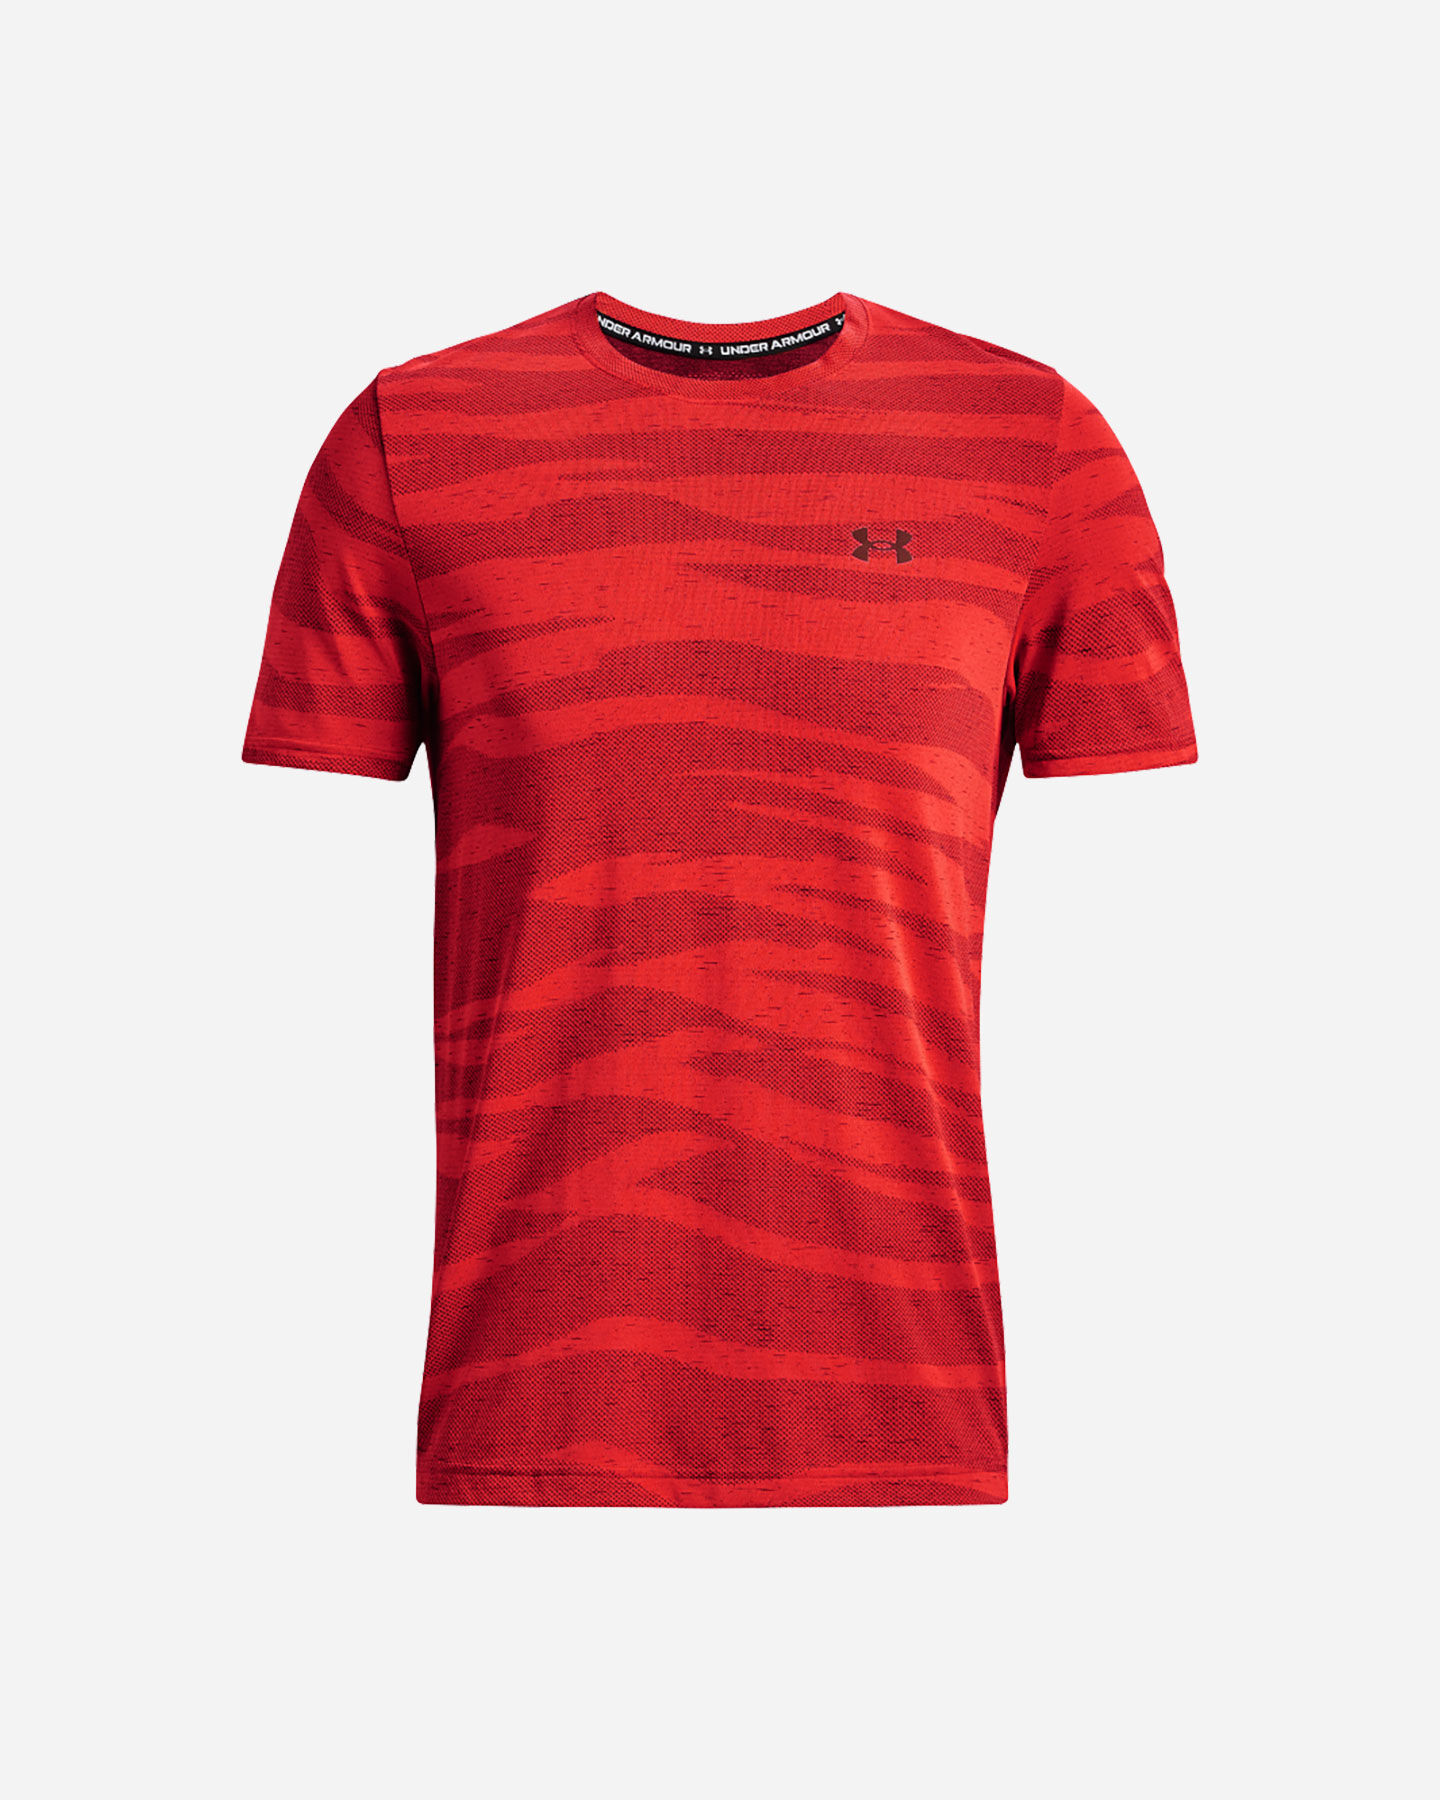  T-Shirt training UNDER ARMOUR SEAMLESS WAVE M S5459215|0810|SM scatto 0